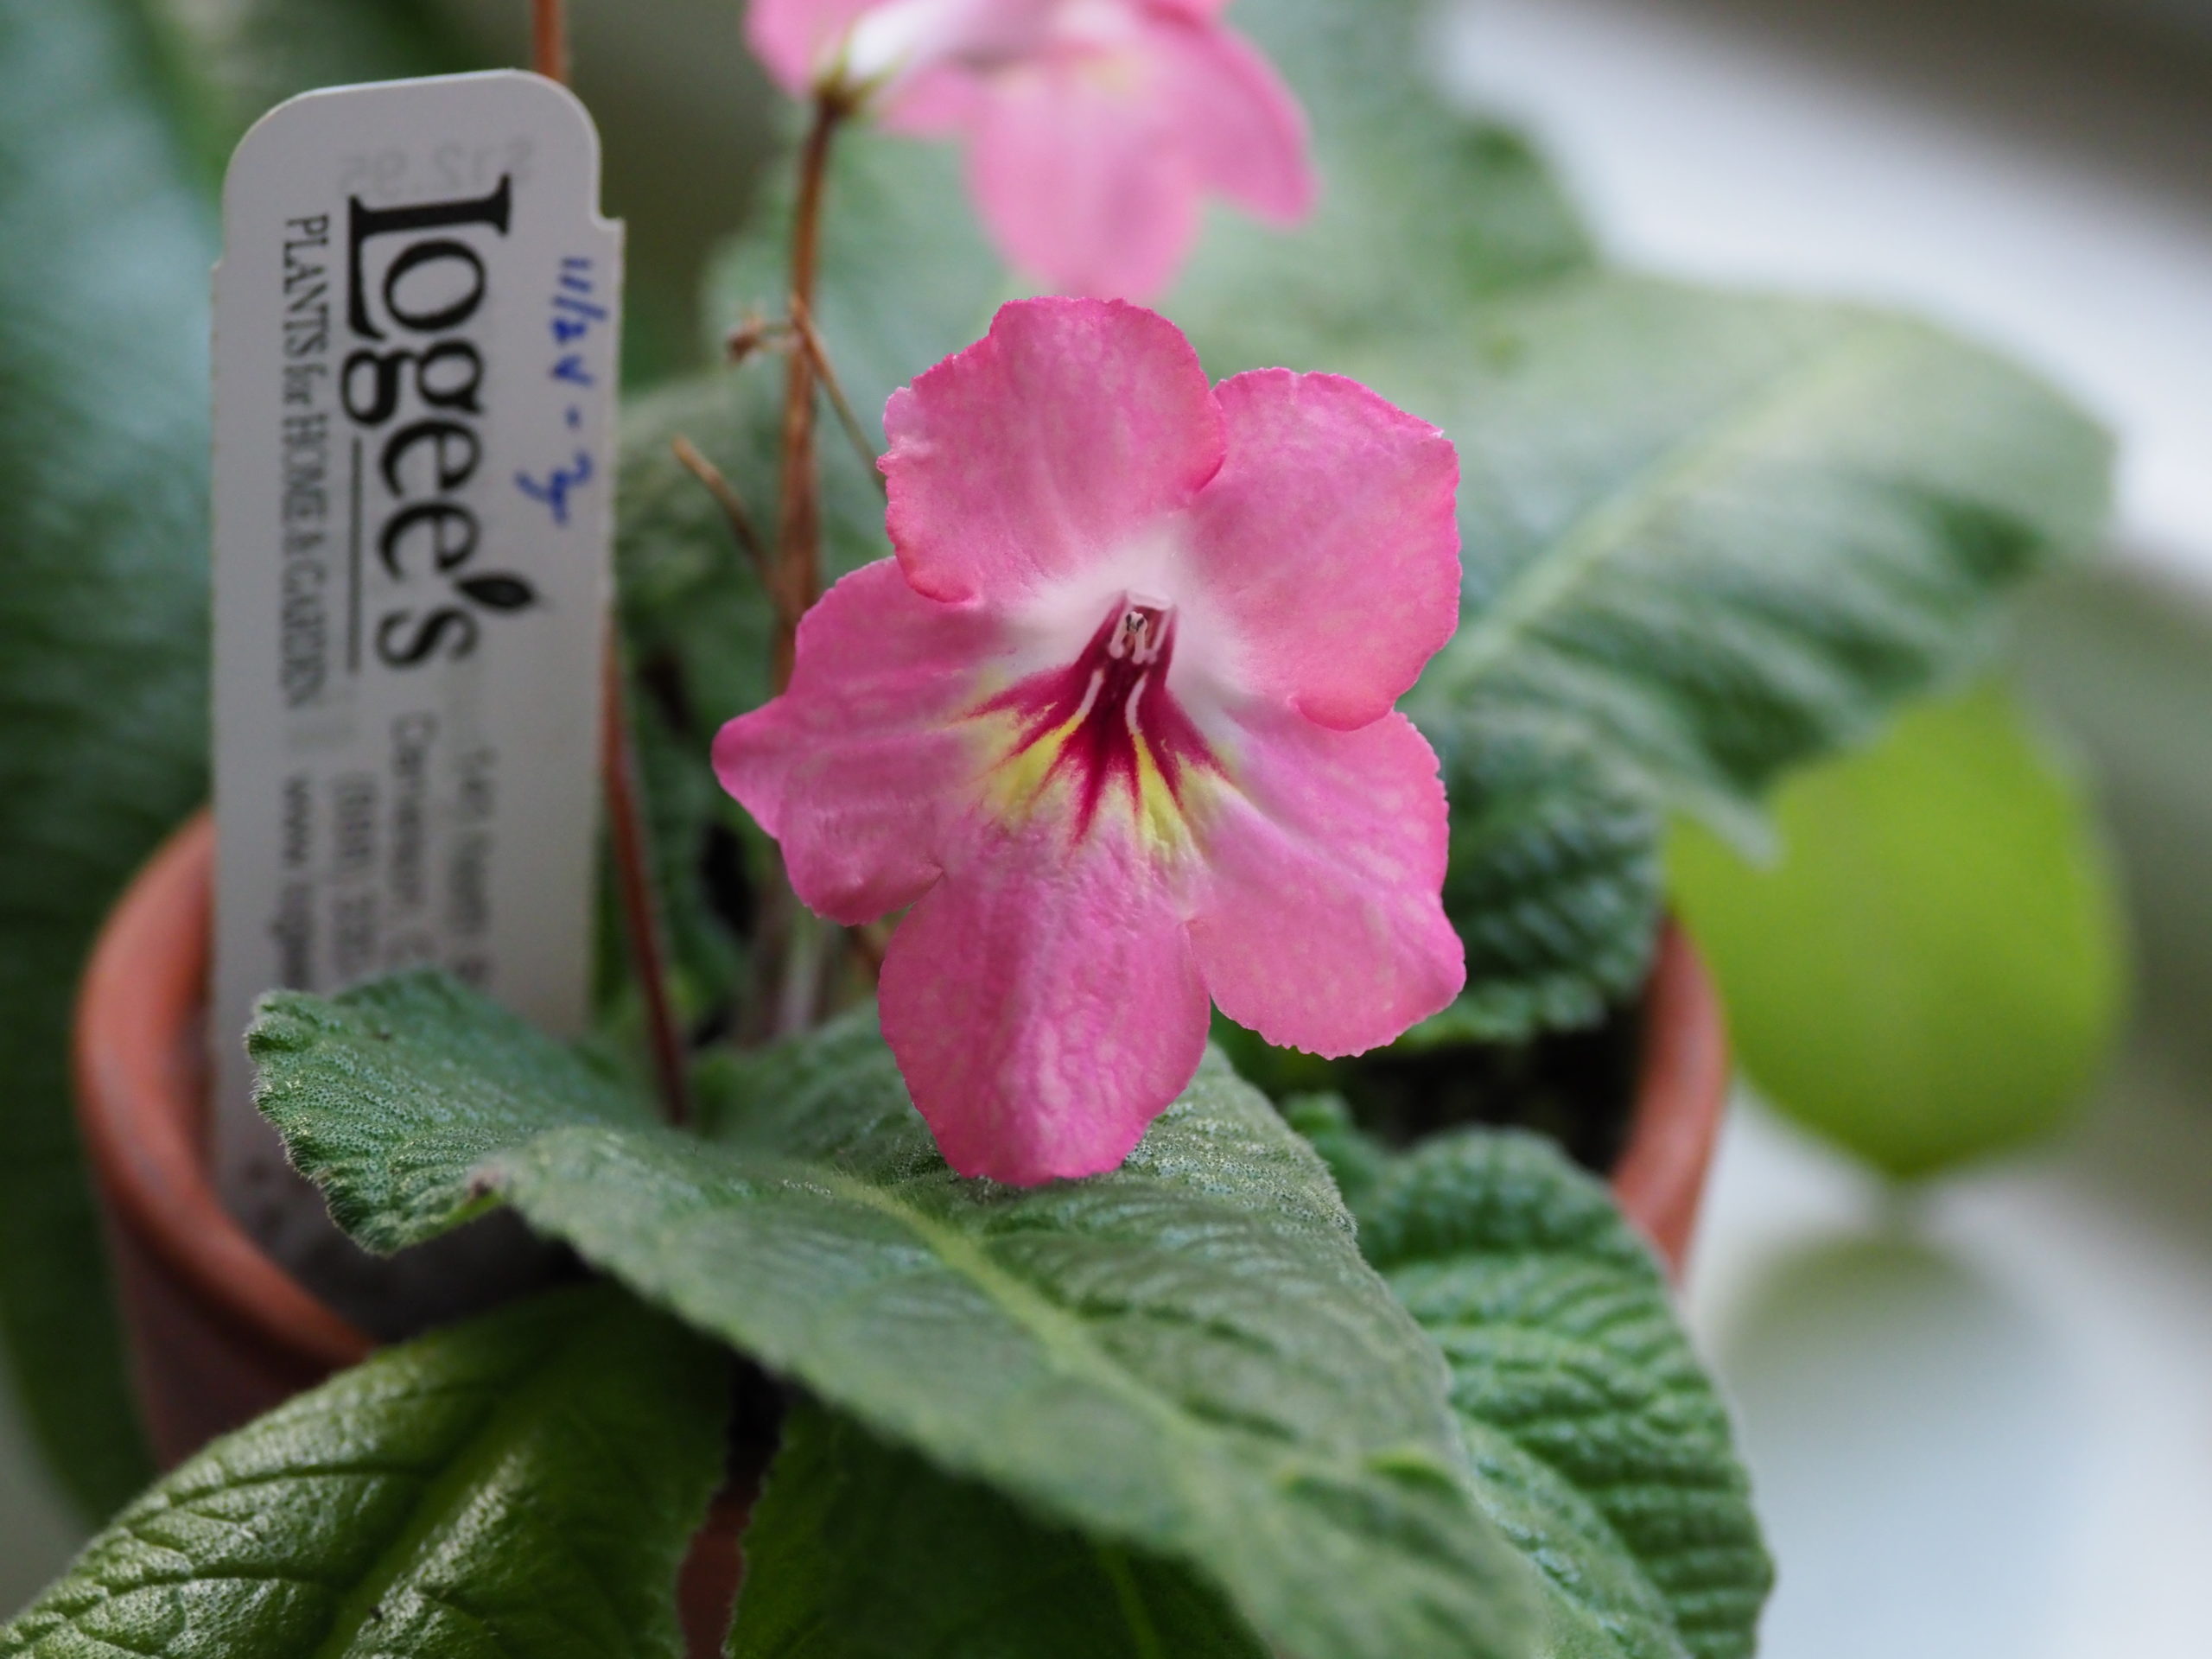 Logee’s Greenhouses is a great place to get a gift card and a gift. This Streptocarpus (Cape primrose) Salmon Sunset was a gift to myself last year. Logee’s has plants you just won’t find at local garden centers.